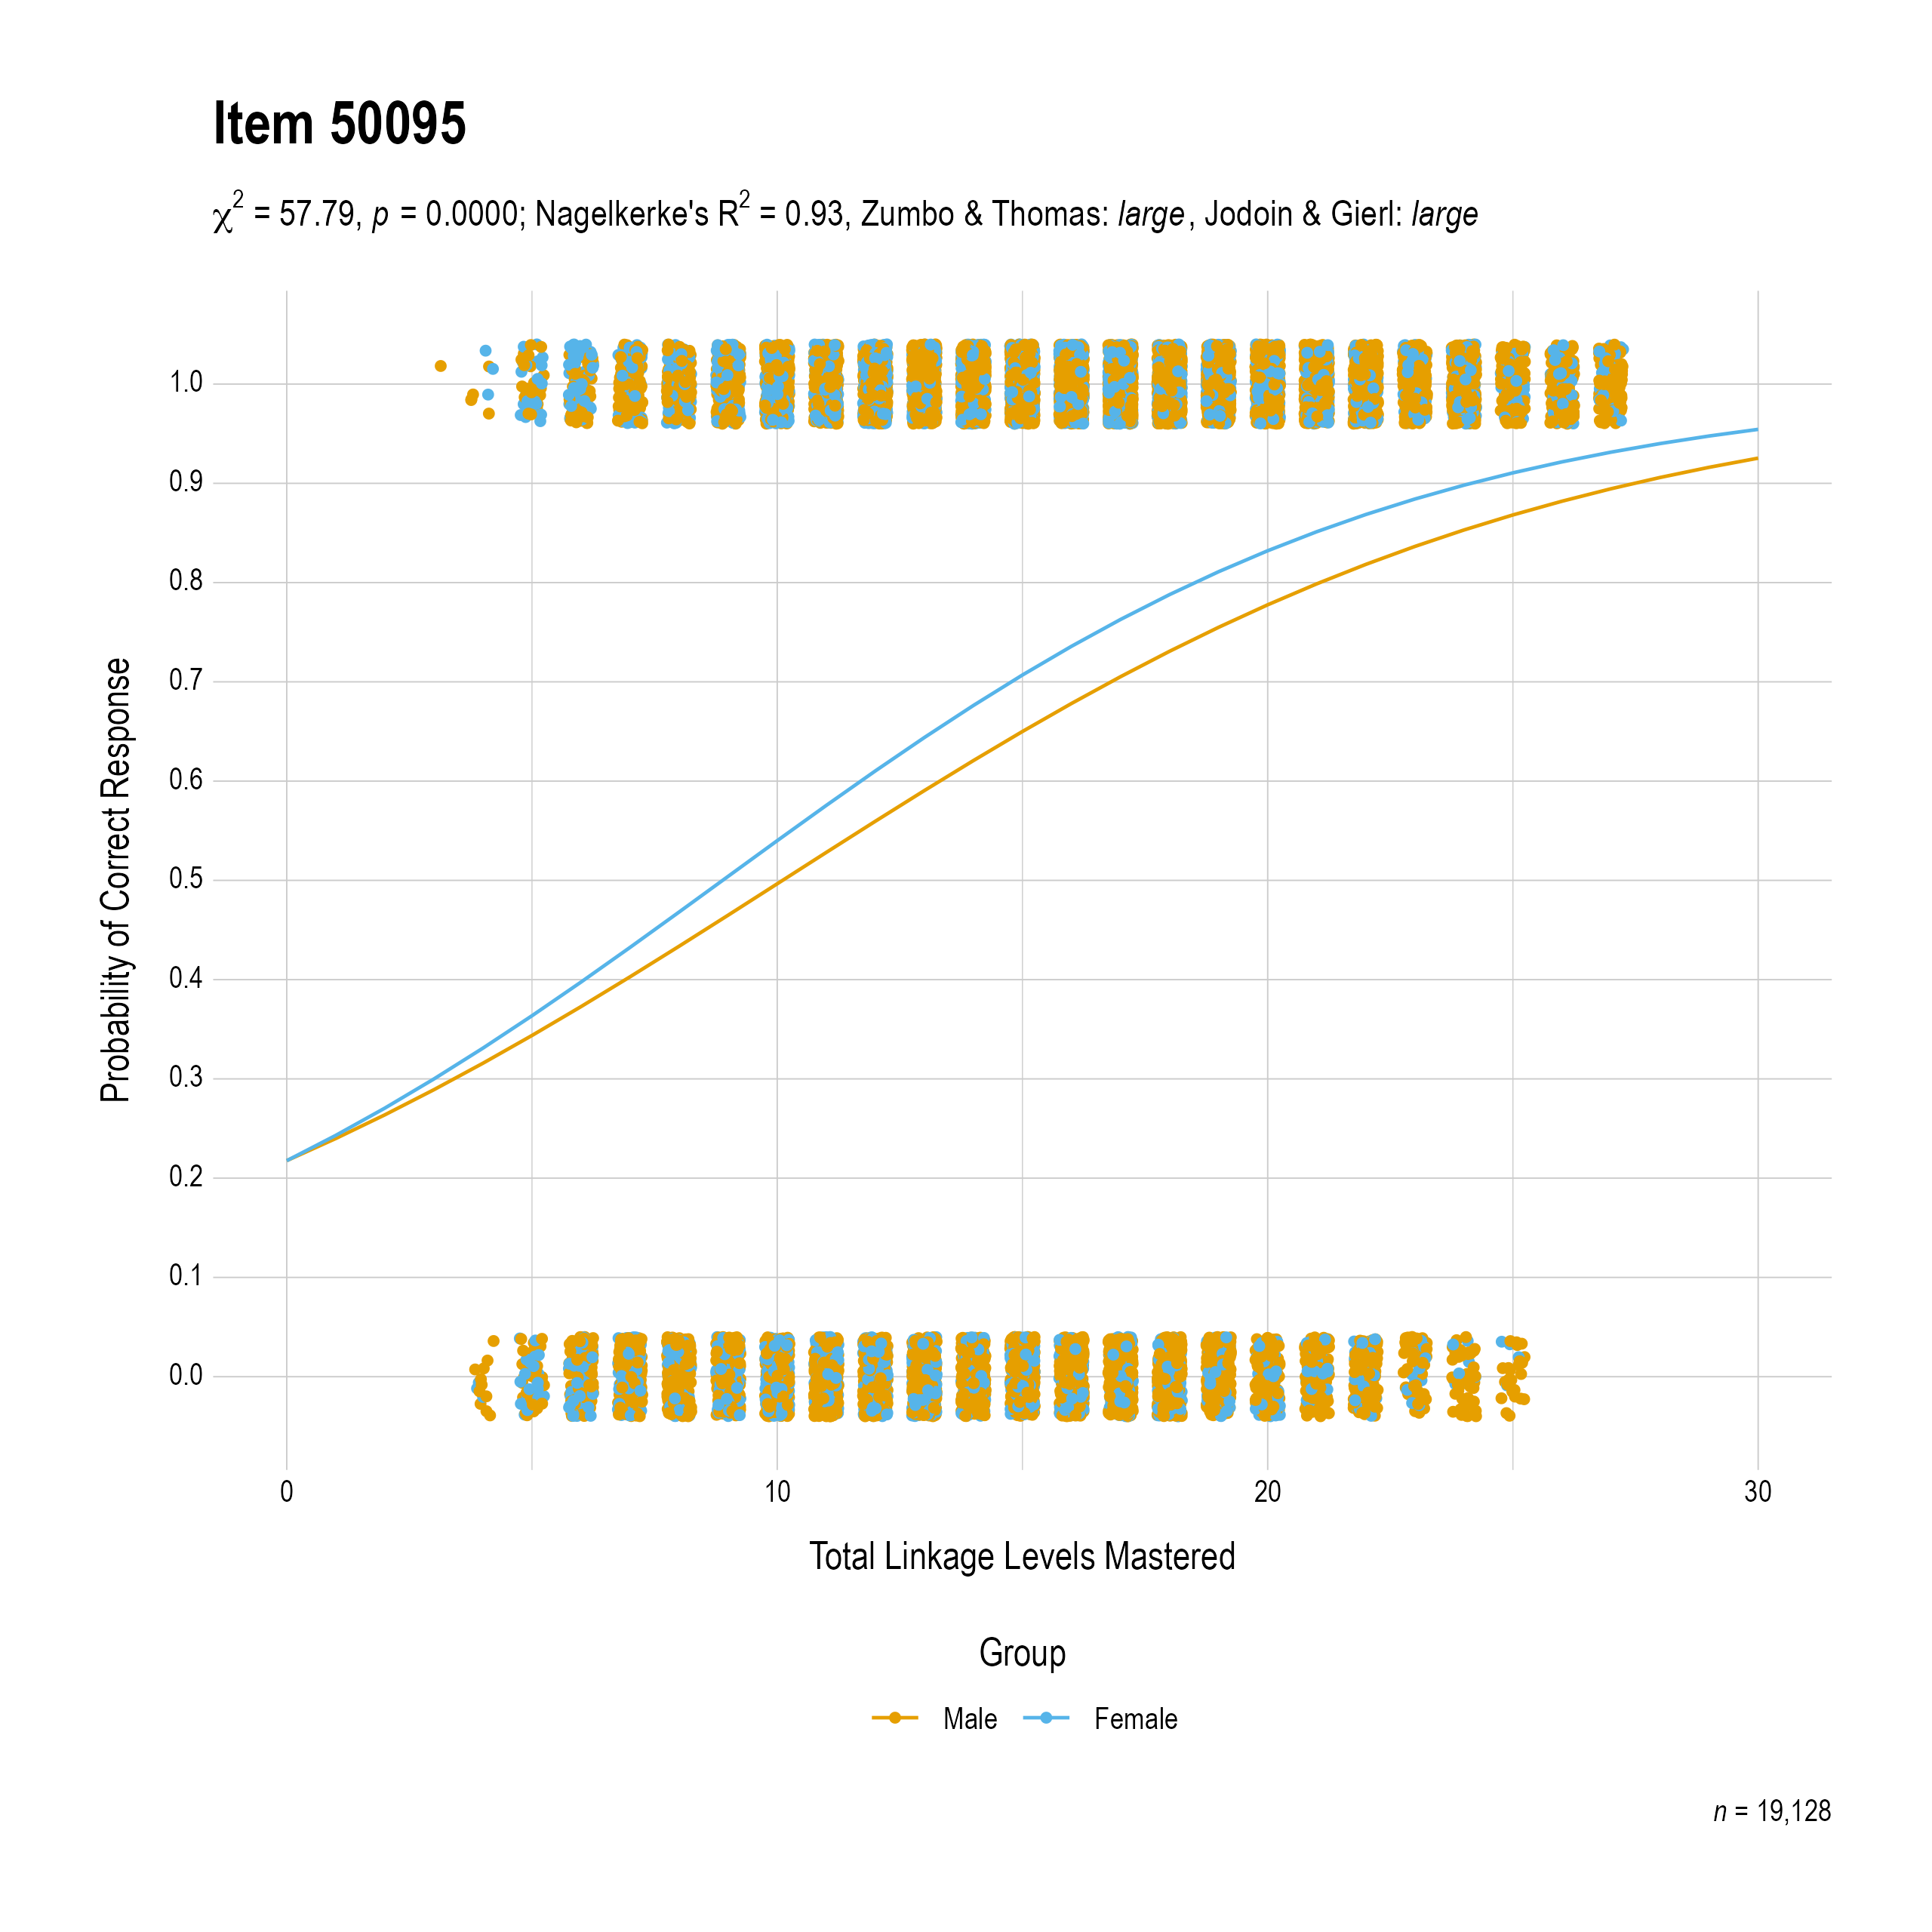 The plot of the combined gender differential item function evidence for Science item 50095. The figure contains points shaded by group. The figure also contains a logistic regression curve for each group. The total linkage levels mastered in is on the x-axis, and the probability of a correct response is on the y-axis.